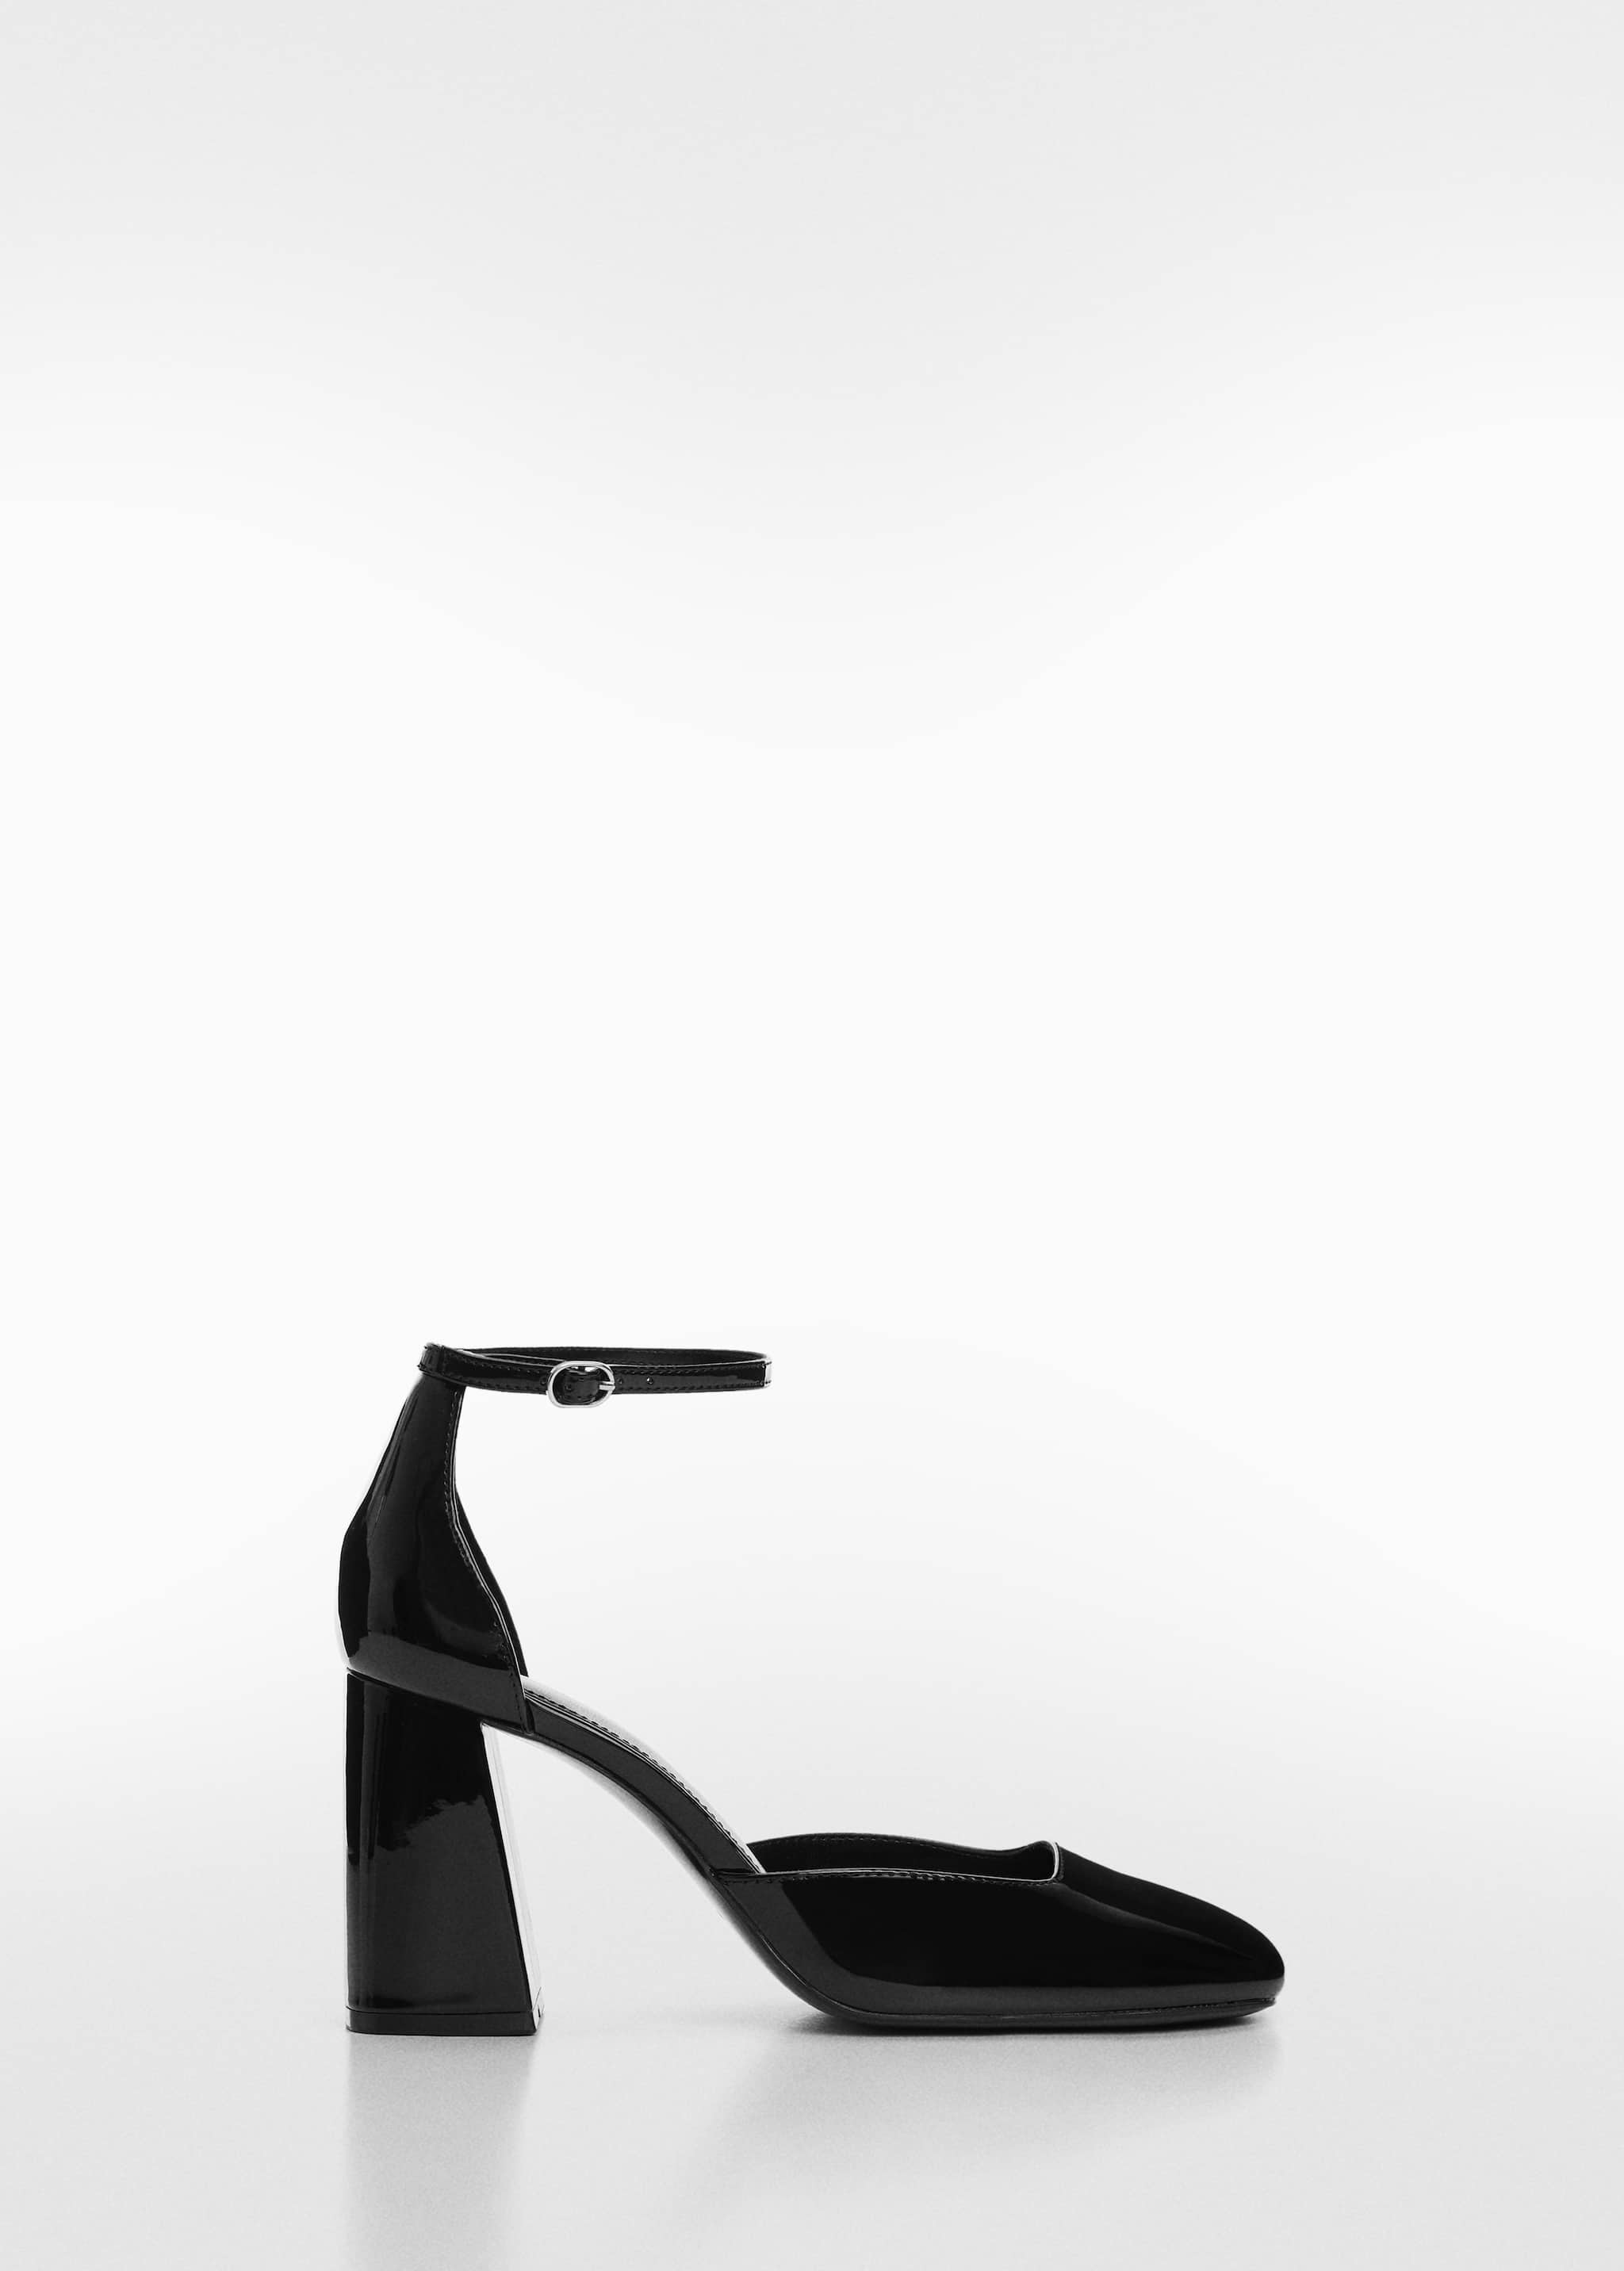 Patent leather-effect heeled shoes - Article without model